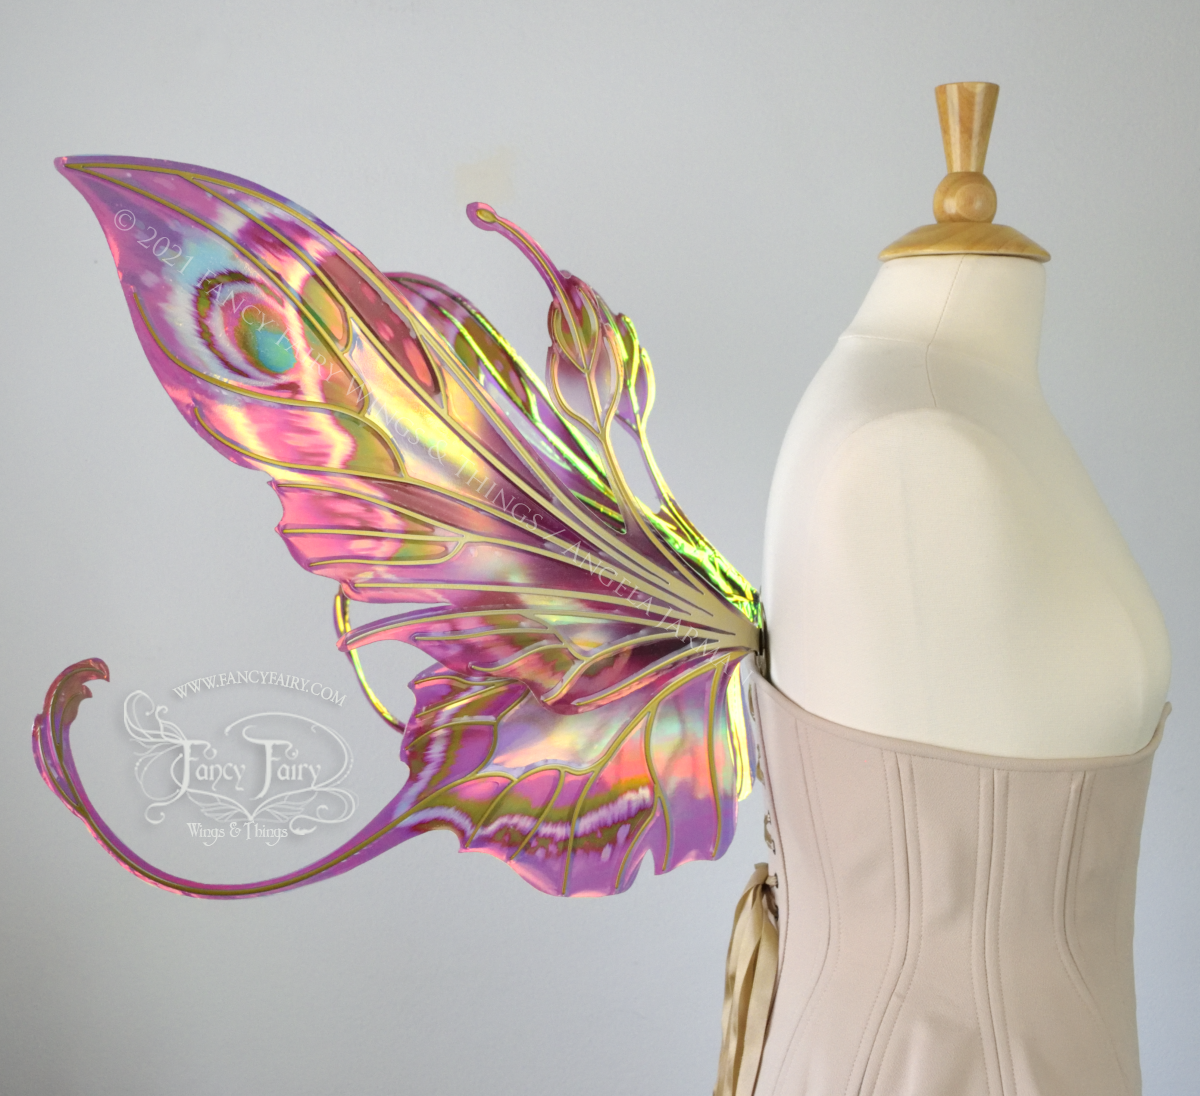 Elvina Iridescent Convertible Painted Fairy Wings in Mauve Rose with Gold veins